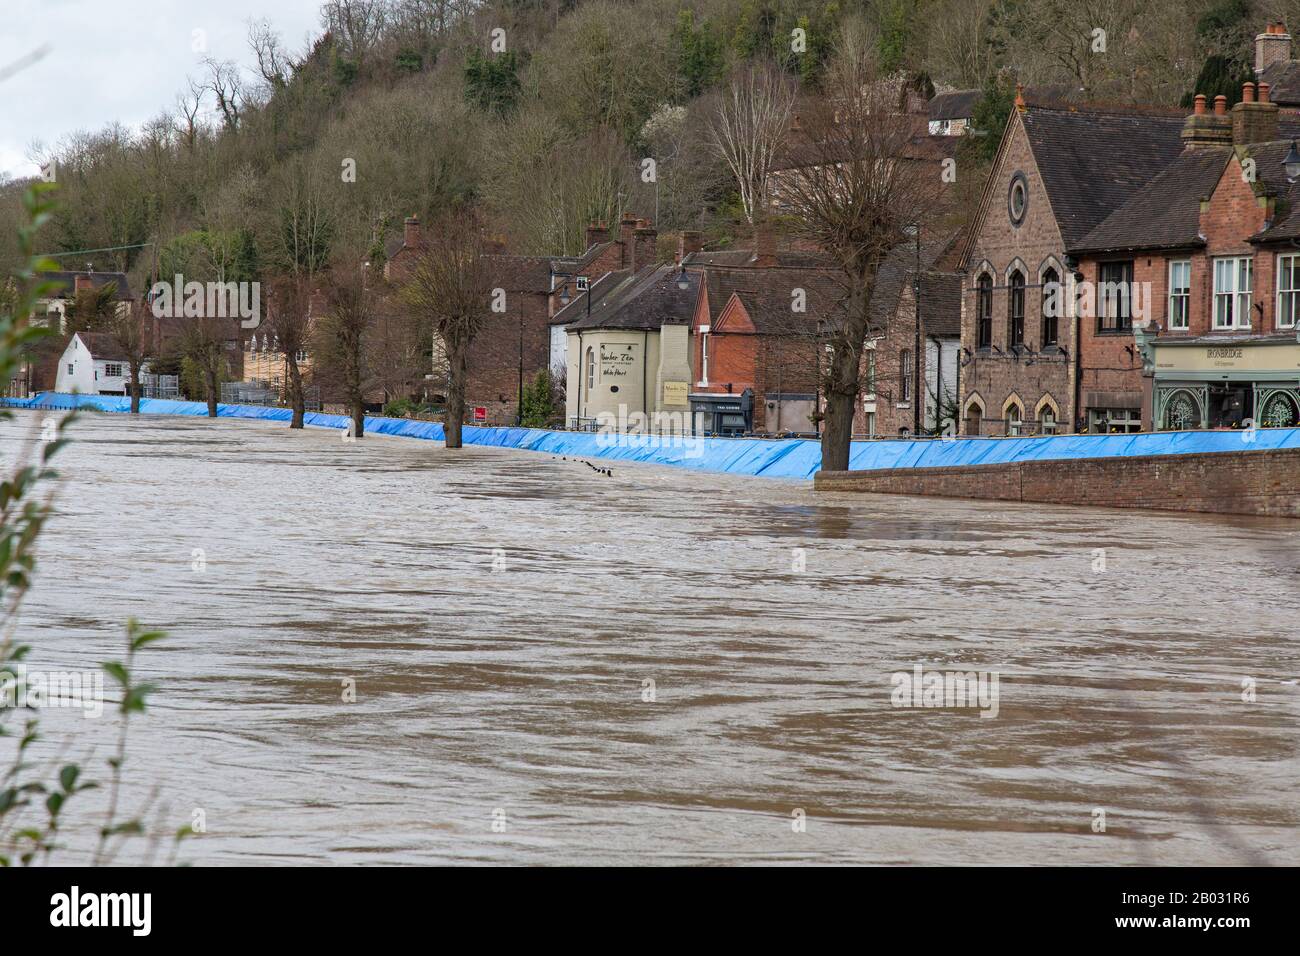 18th February 2020. The River Severn flooding in Ironbridge, Shropshire, England. A temporary flood barrier struggles to hold back the River, which has reached its highest point for 20 years, threatening homes and businesses along the River banks of the Ironbridge Gorge. The Ironbridge Gorge is a World Heritage Site. Stock Photo